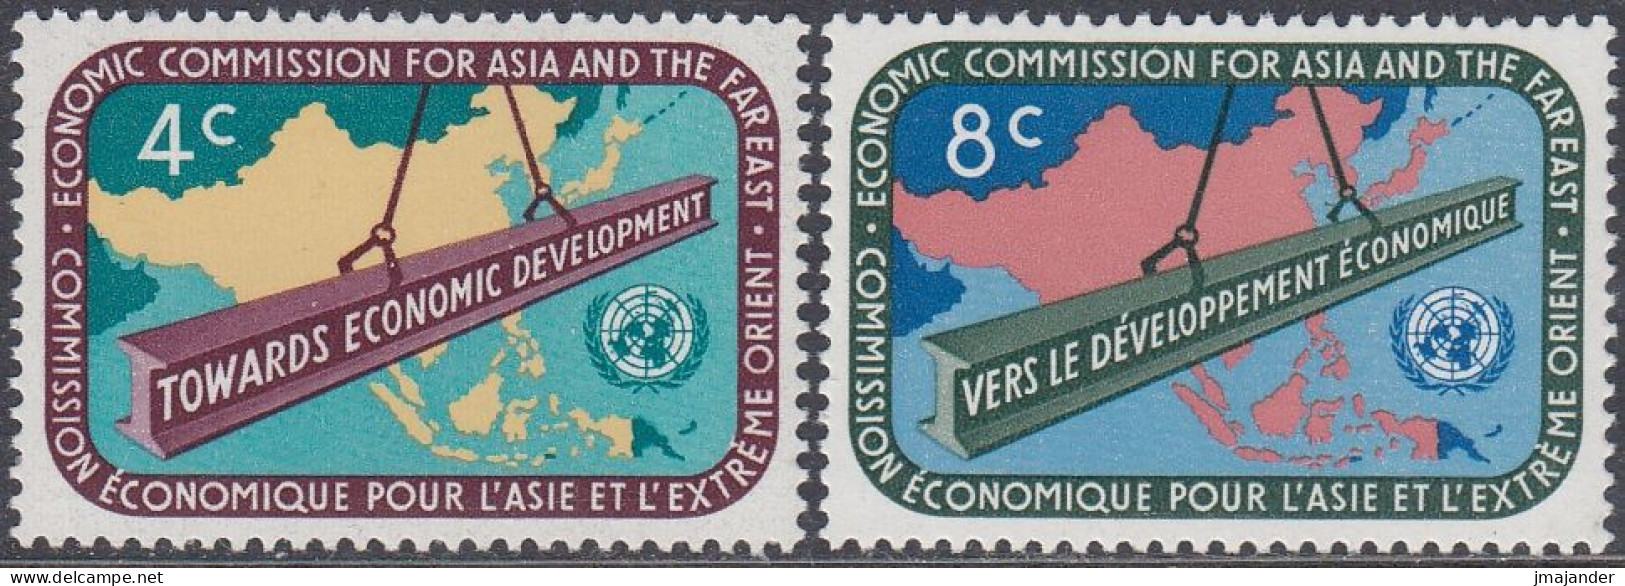 UN New York 1960 - U.N. Economic Commission For Asia And The Far East Or "ECAFE" - Mi 86-87 ** MNH - Ungebraucht